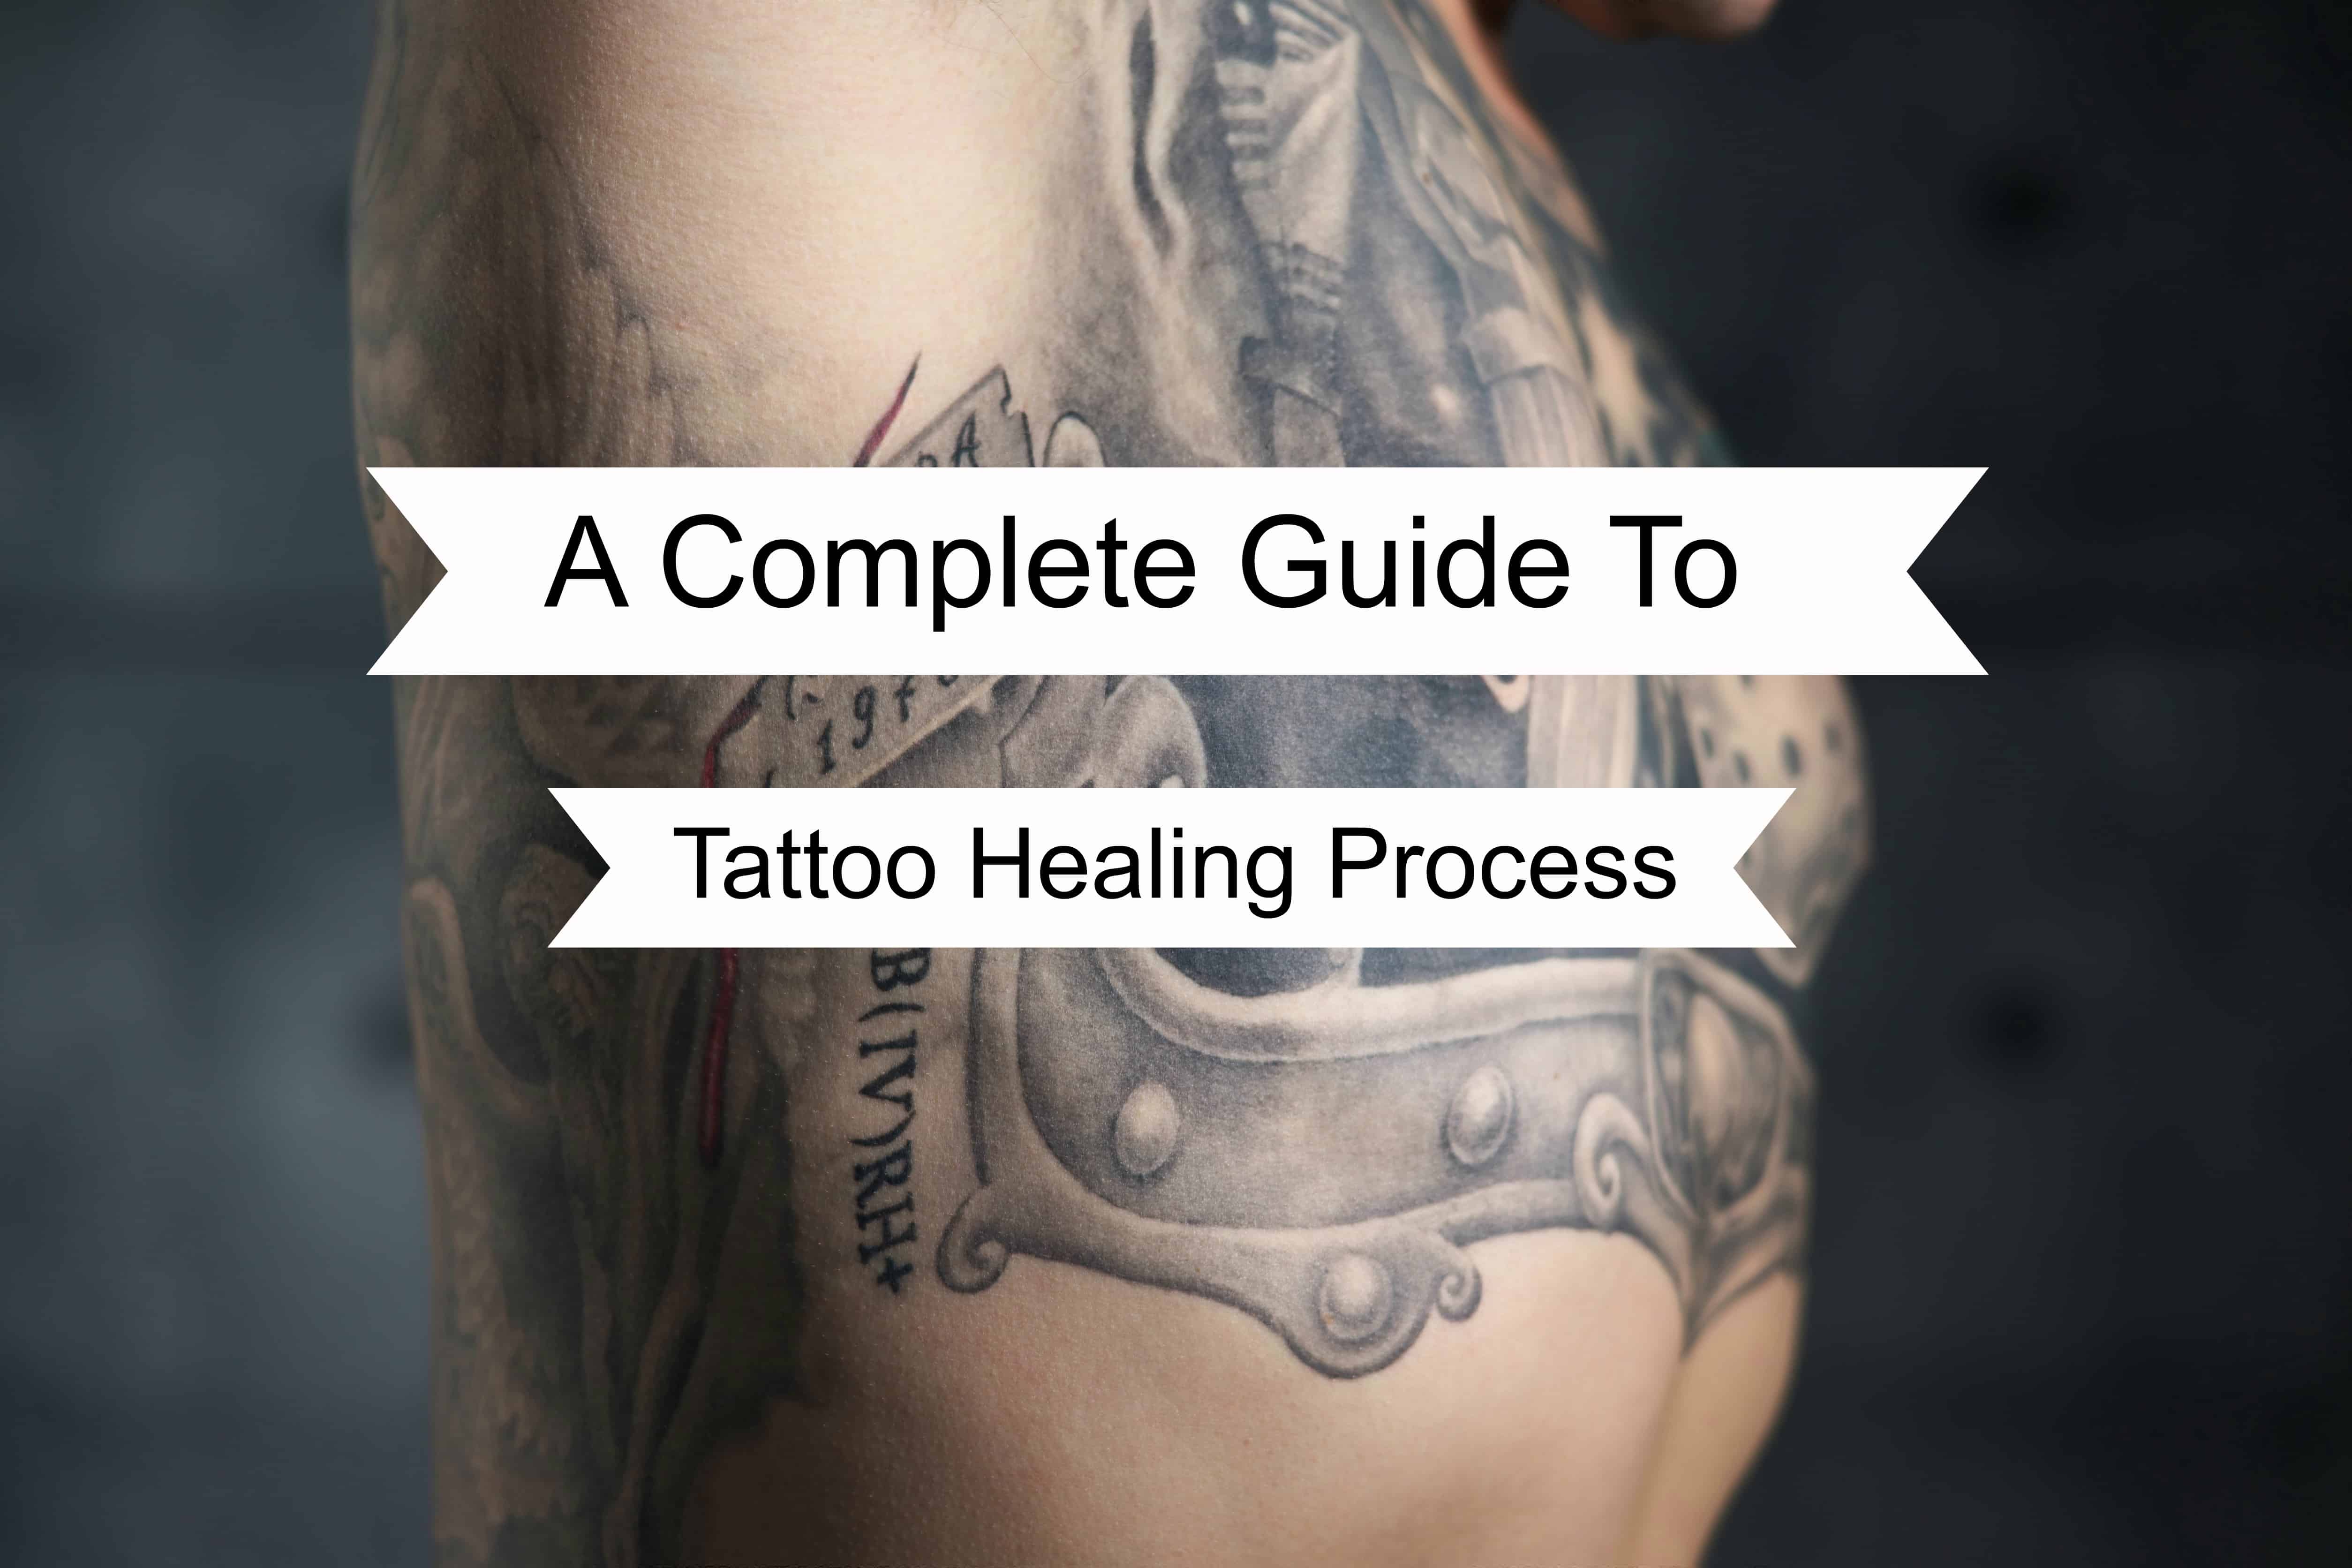 complete guide to tatttoo healing process tattoo aftercare